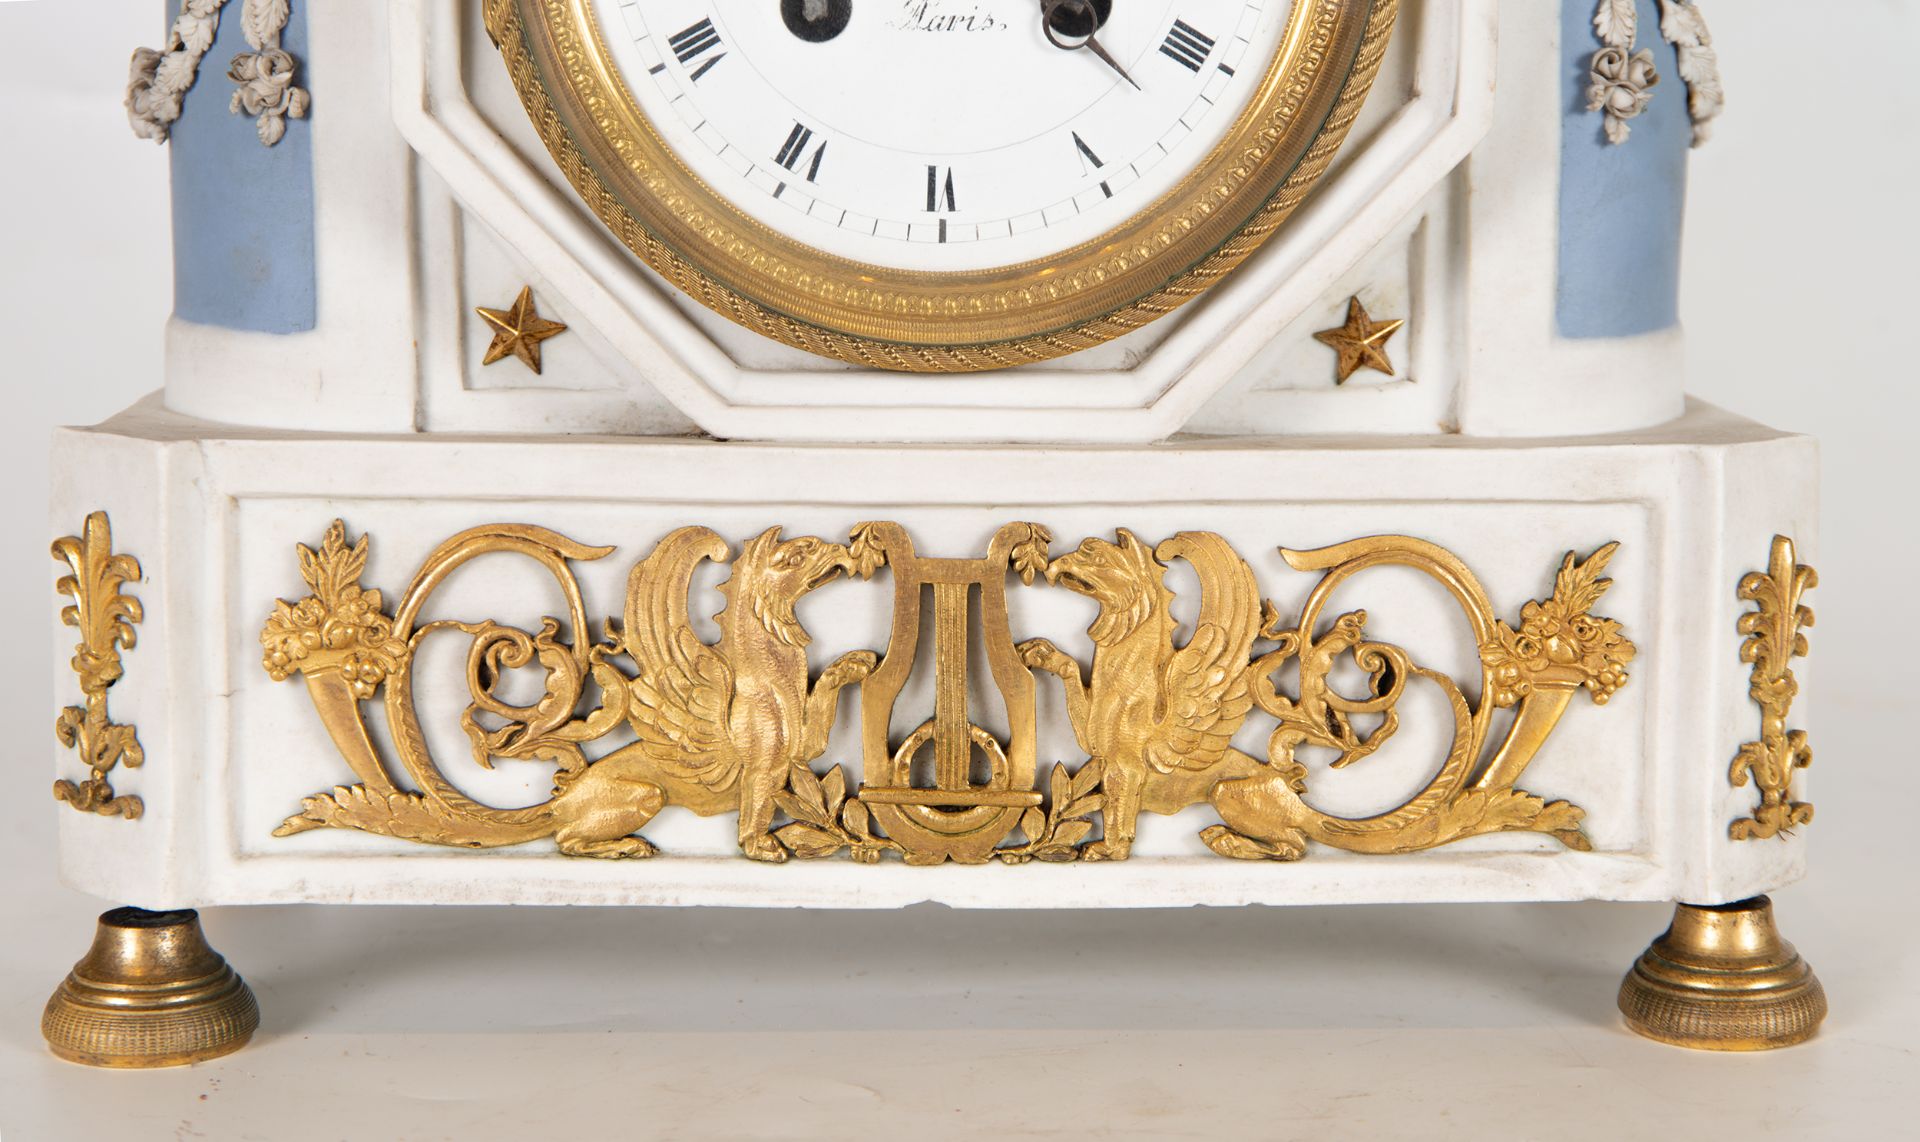 Empire Style Clock in Wedgwood porcelain and gilt bronze, 19th century French school - Image 6 of 11